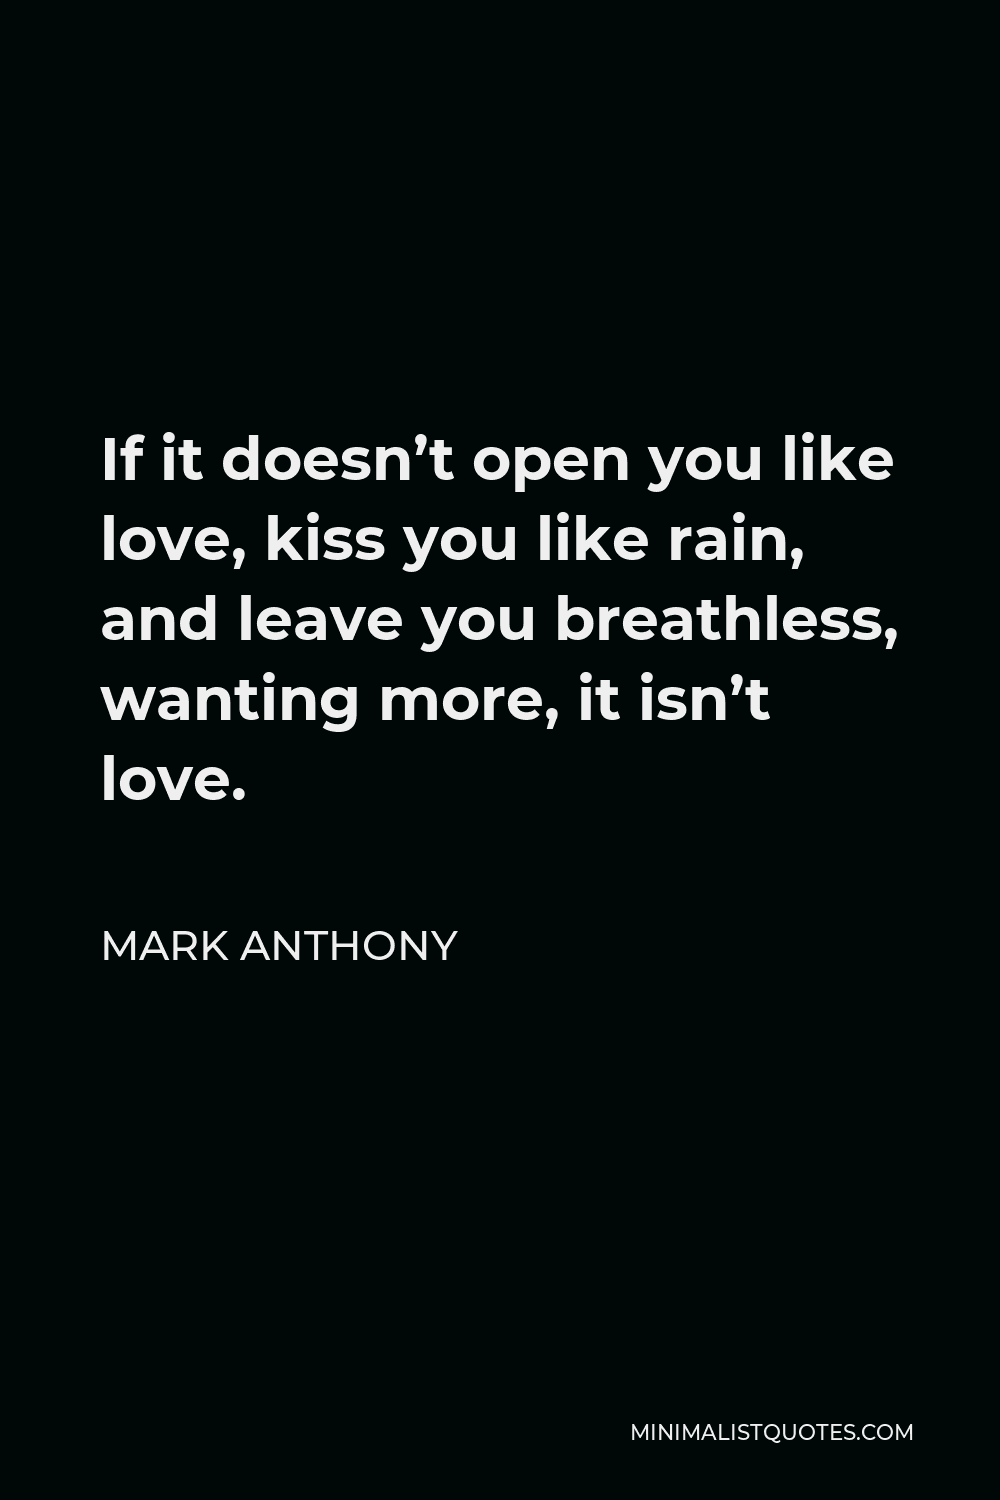 Mark Anthony Quote - If it doesn’t open you like love, kiss you like rain, and leave you breathless, wanting more, it isn’t love.